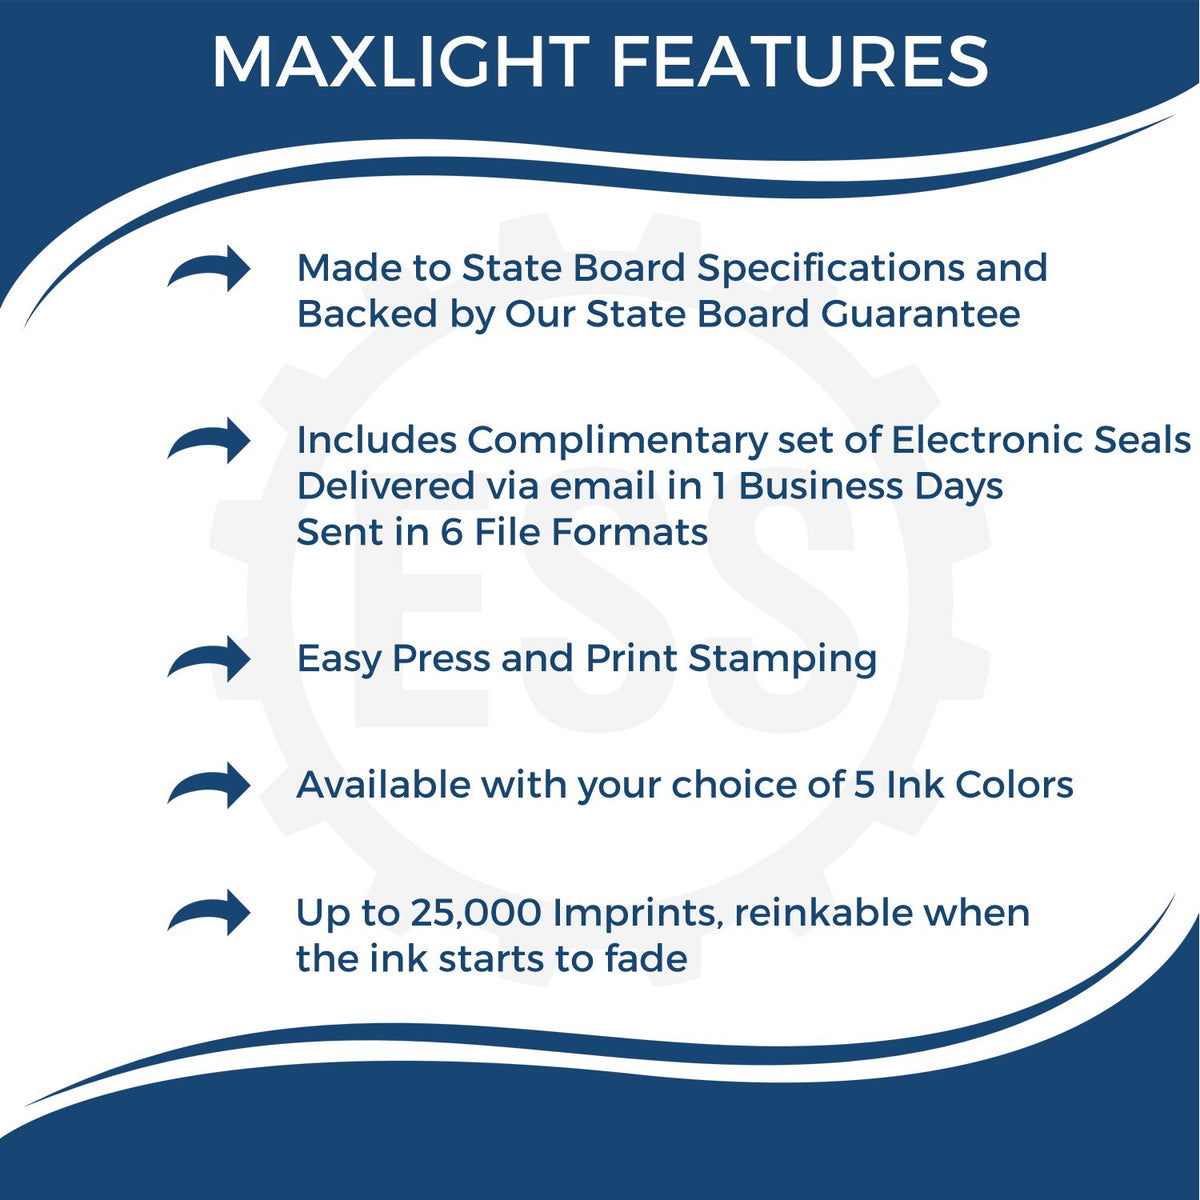 A picture of an infographic highlighting the selling points for the Premium MaxLight Pre-Inked Tennessee Landscape Architectural Stamp